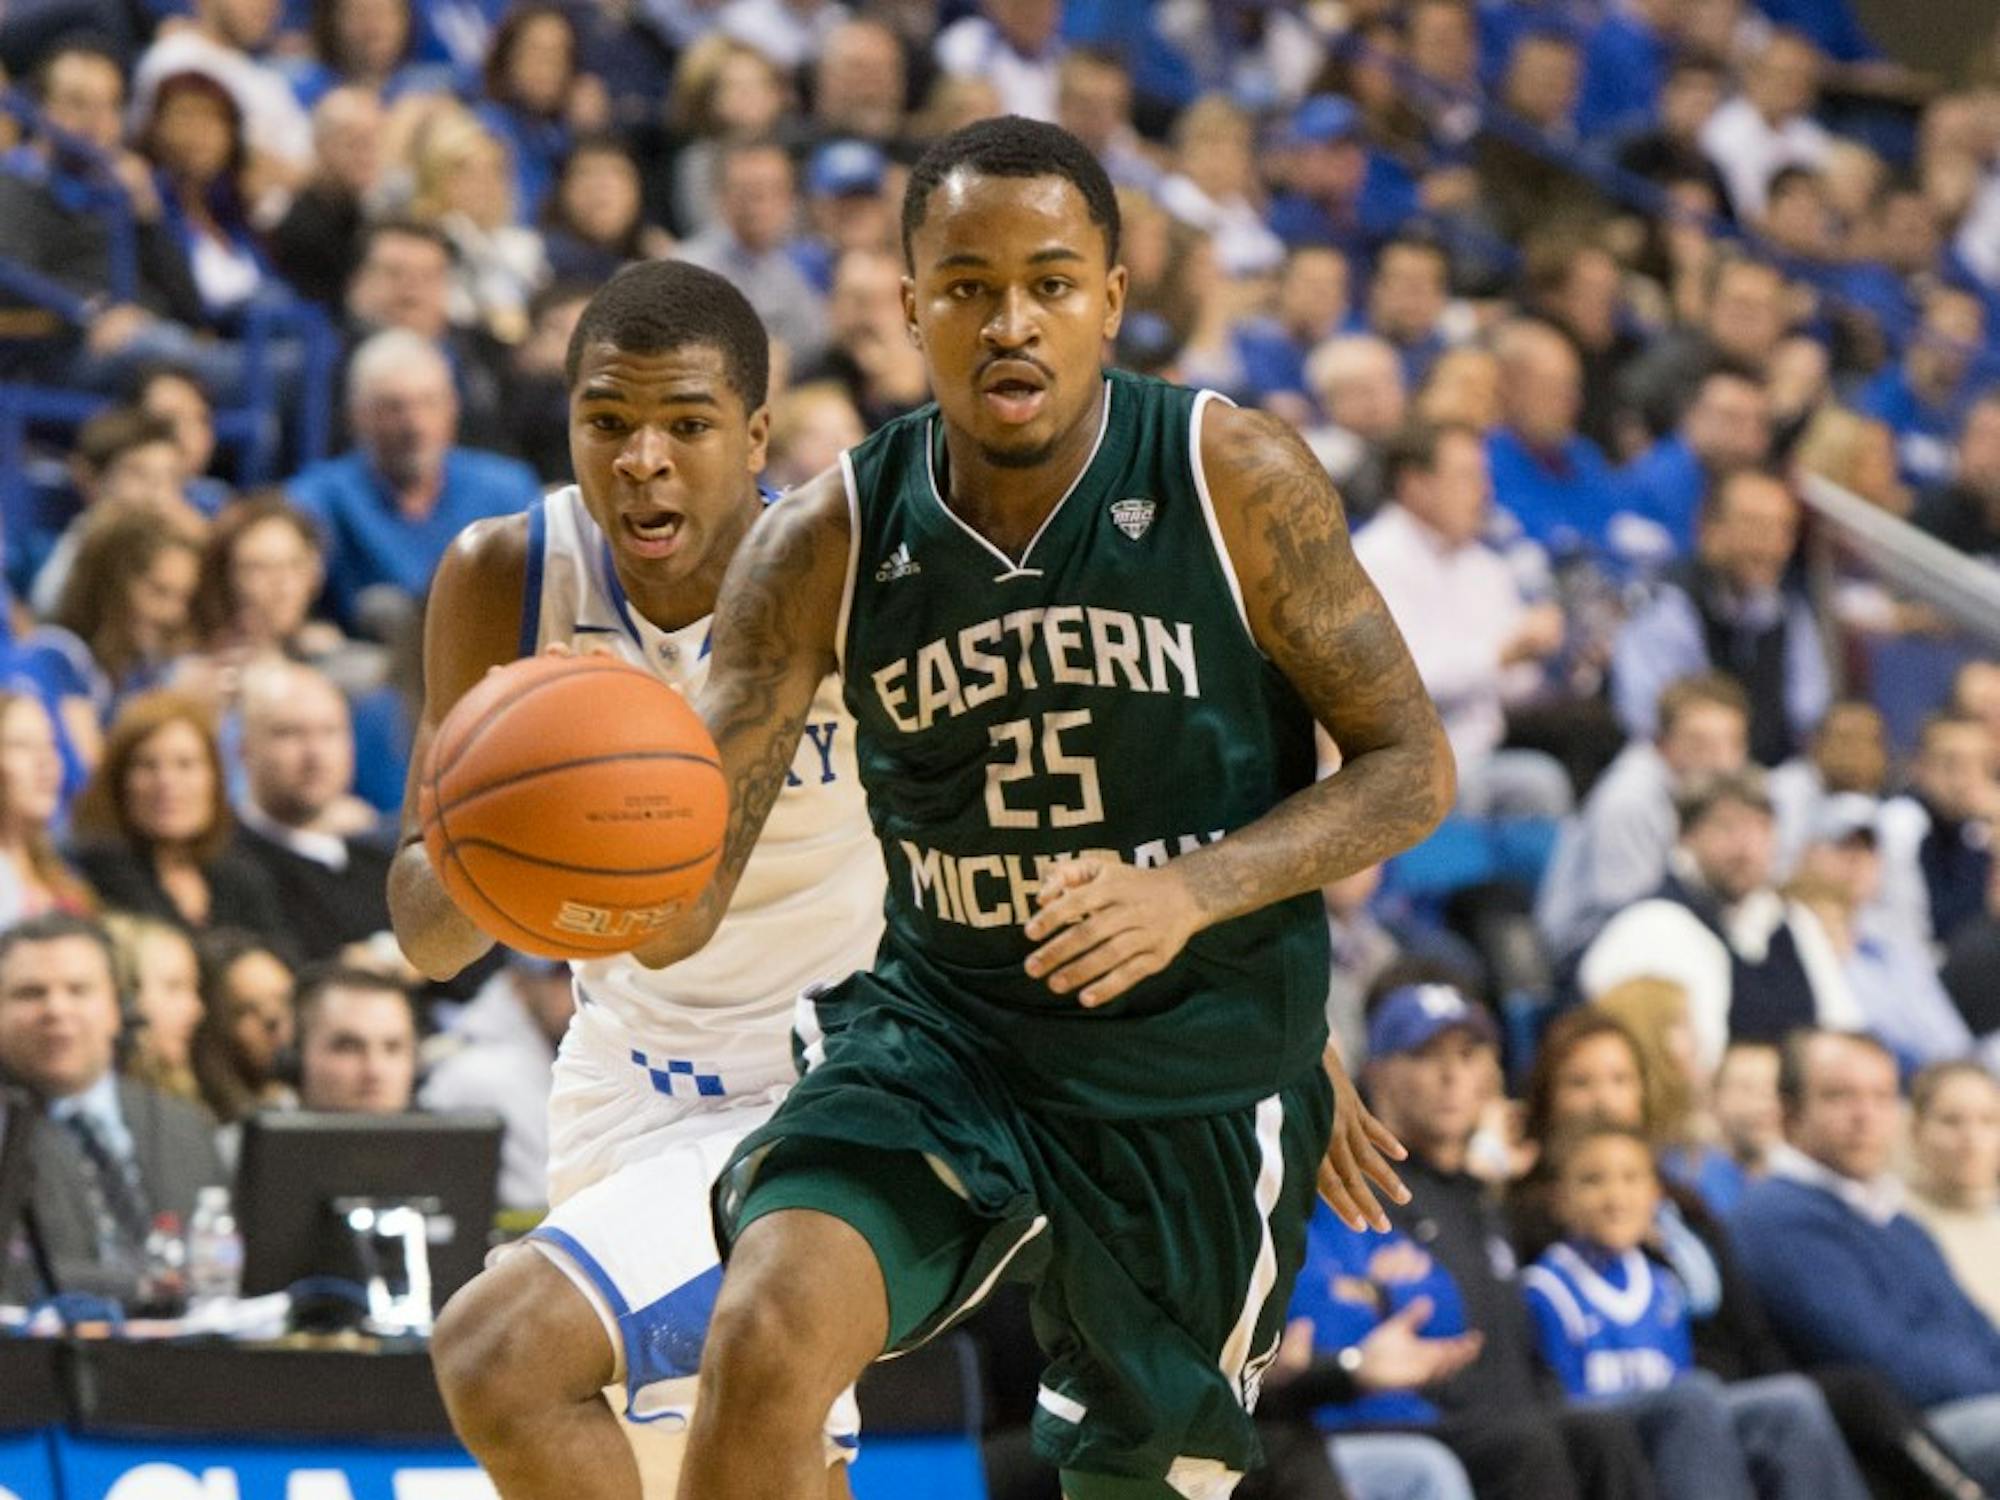 EMU guard Darell Combs (25) led the way with a career high 23 points in Eastern Michigan's 81-63 loss to Kentucky Wednesday afternoon in Lexington, Kentucky.